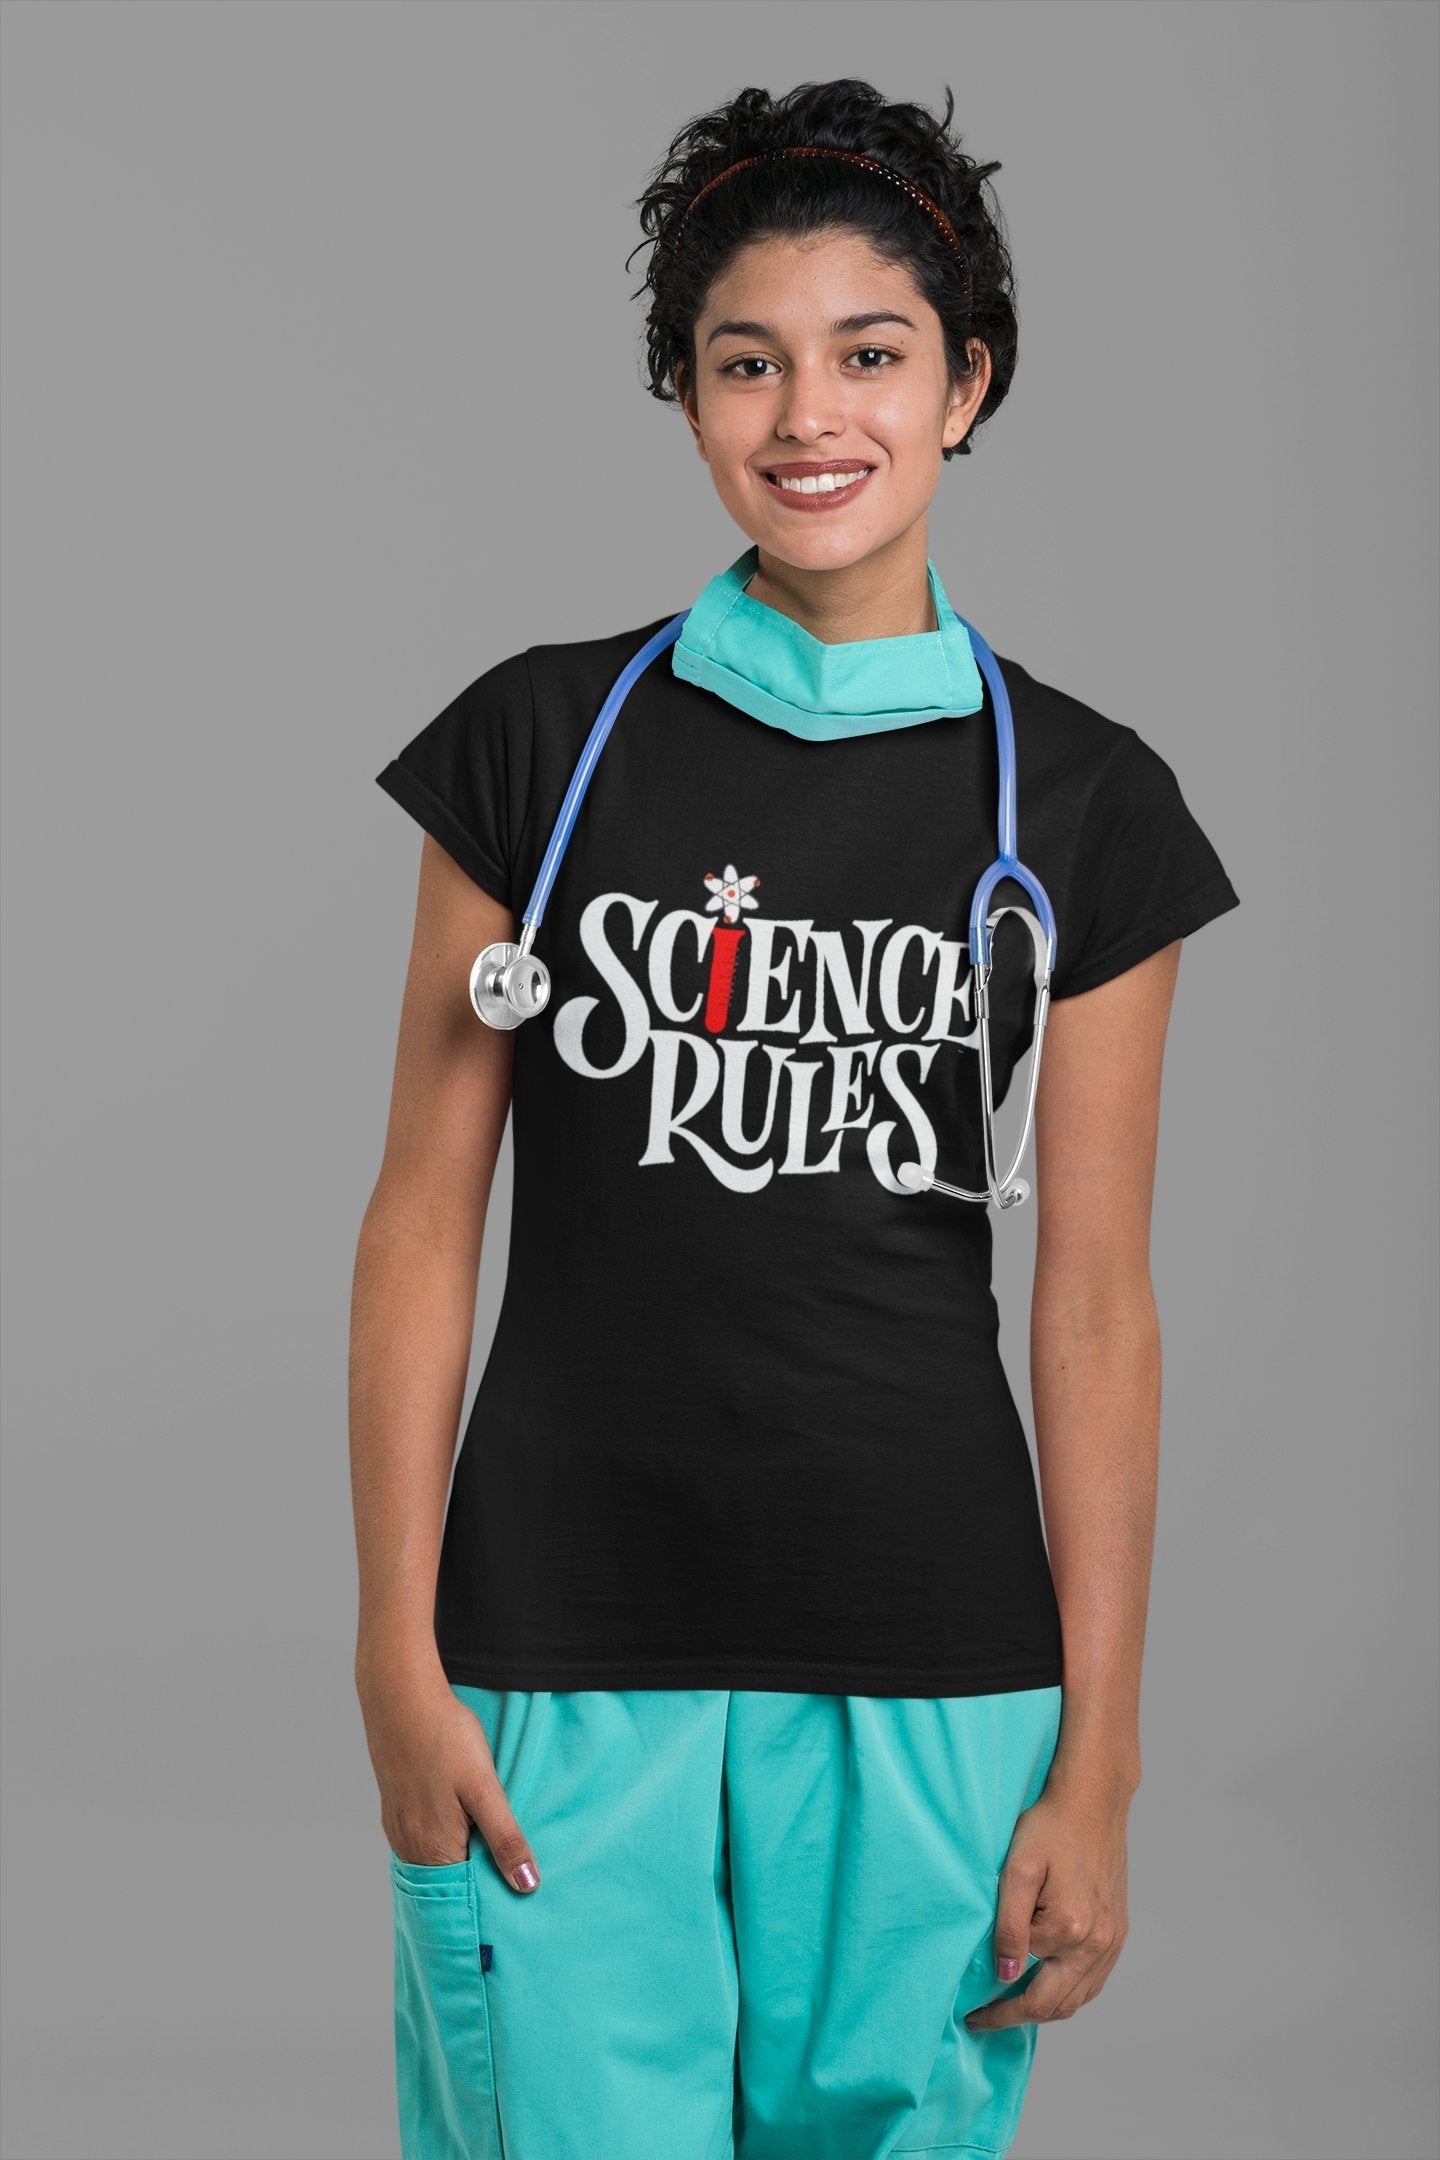 Science Rules - Insane Tees